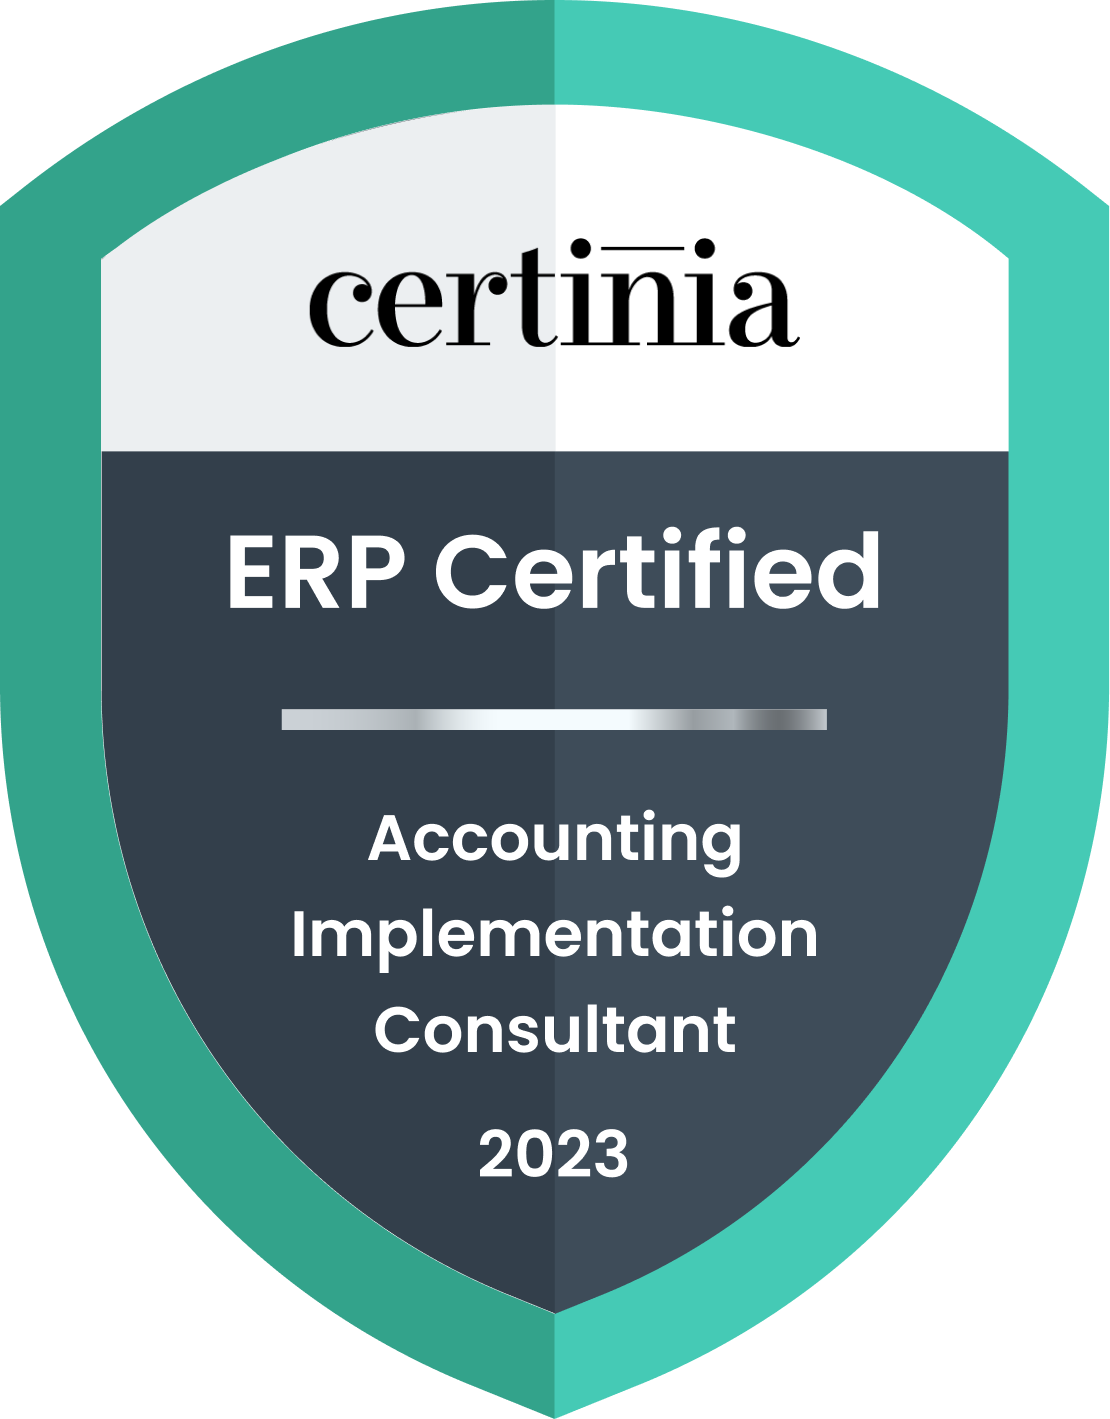 Certinia certification for Accounting Implementation Consultant 2023 Badge